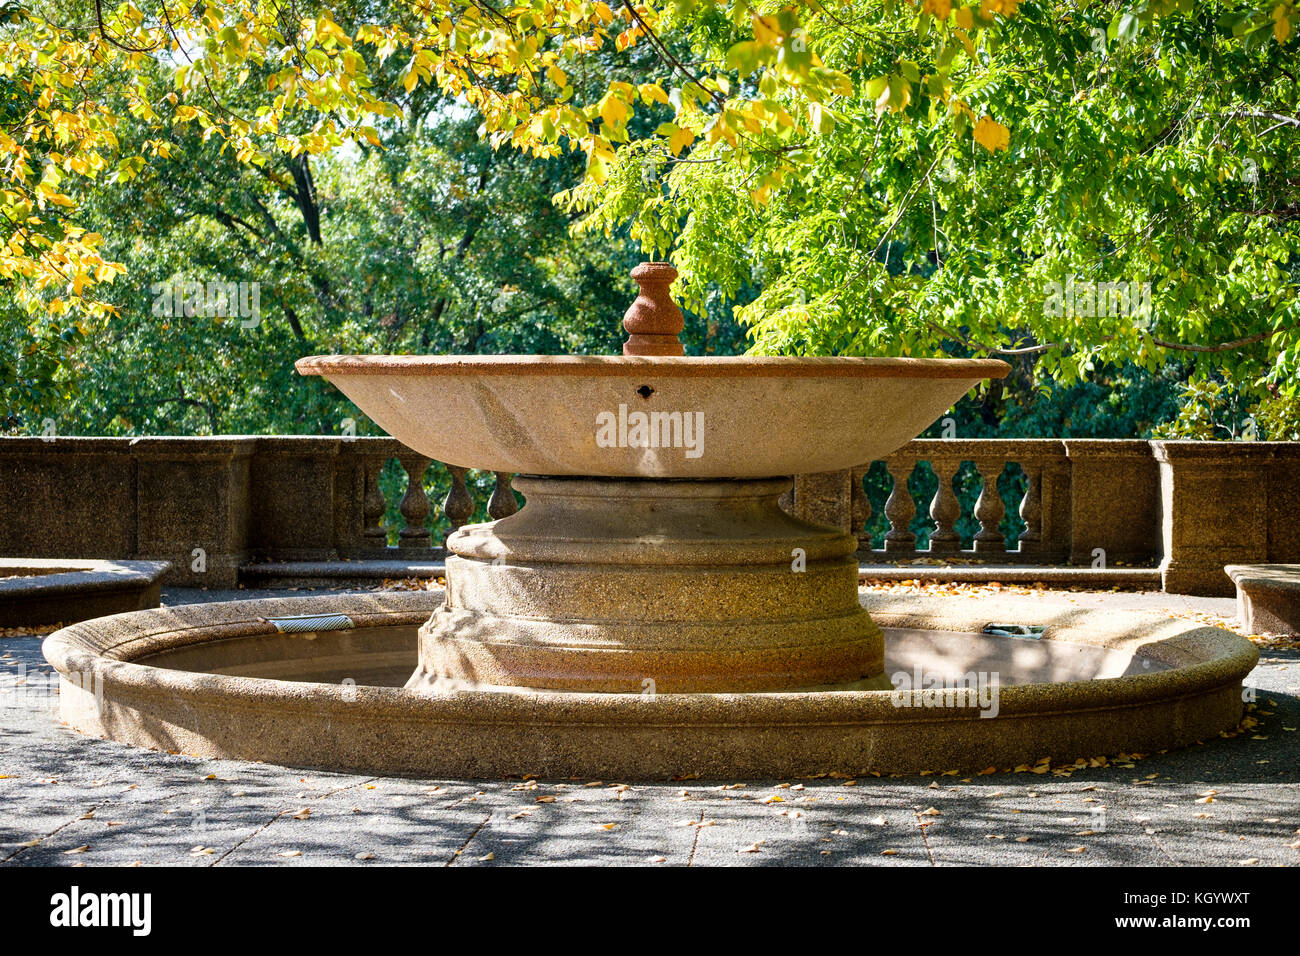 Columbia Heights neighbourhood, Meridian Hill Park/Malcolm X Park fountain in Washington, D.C., United States of America, USA. Stock Photo